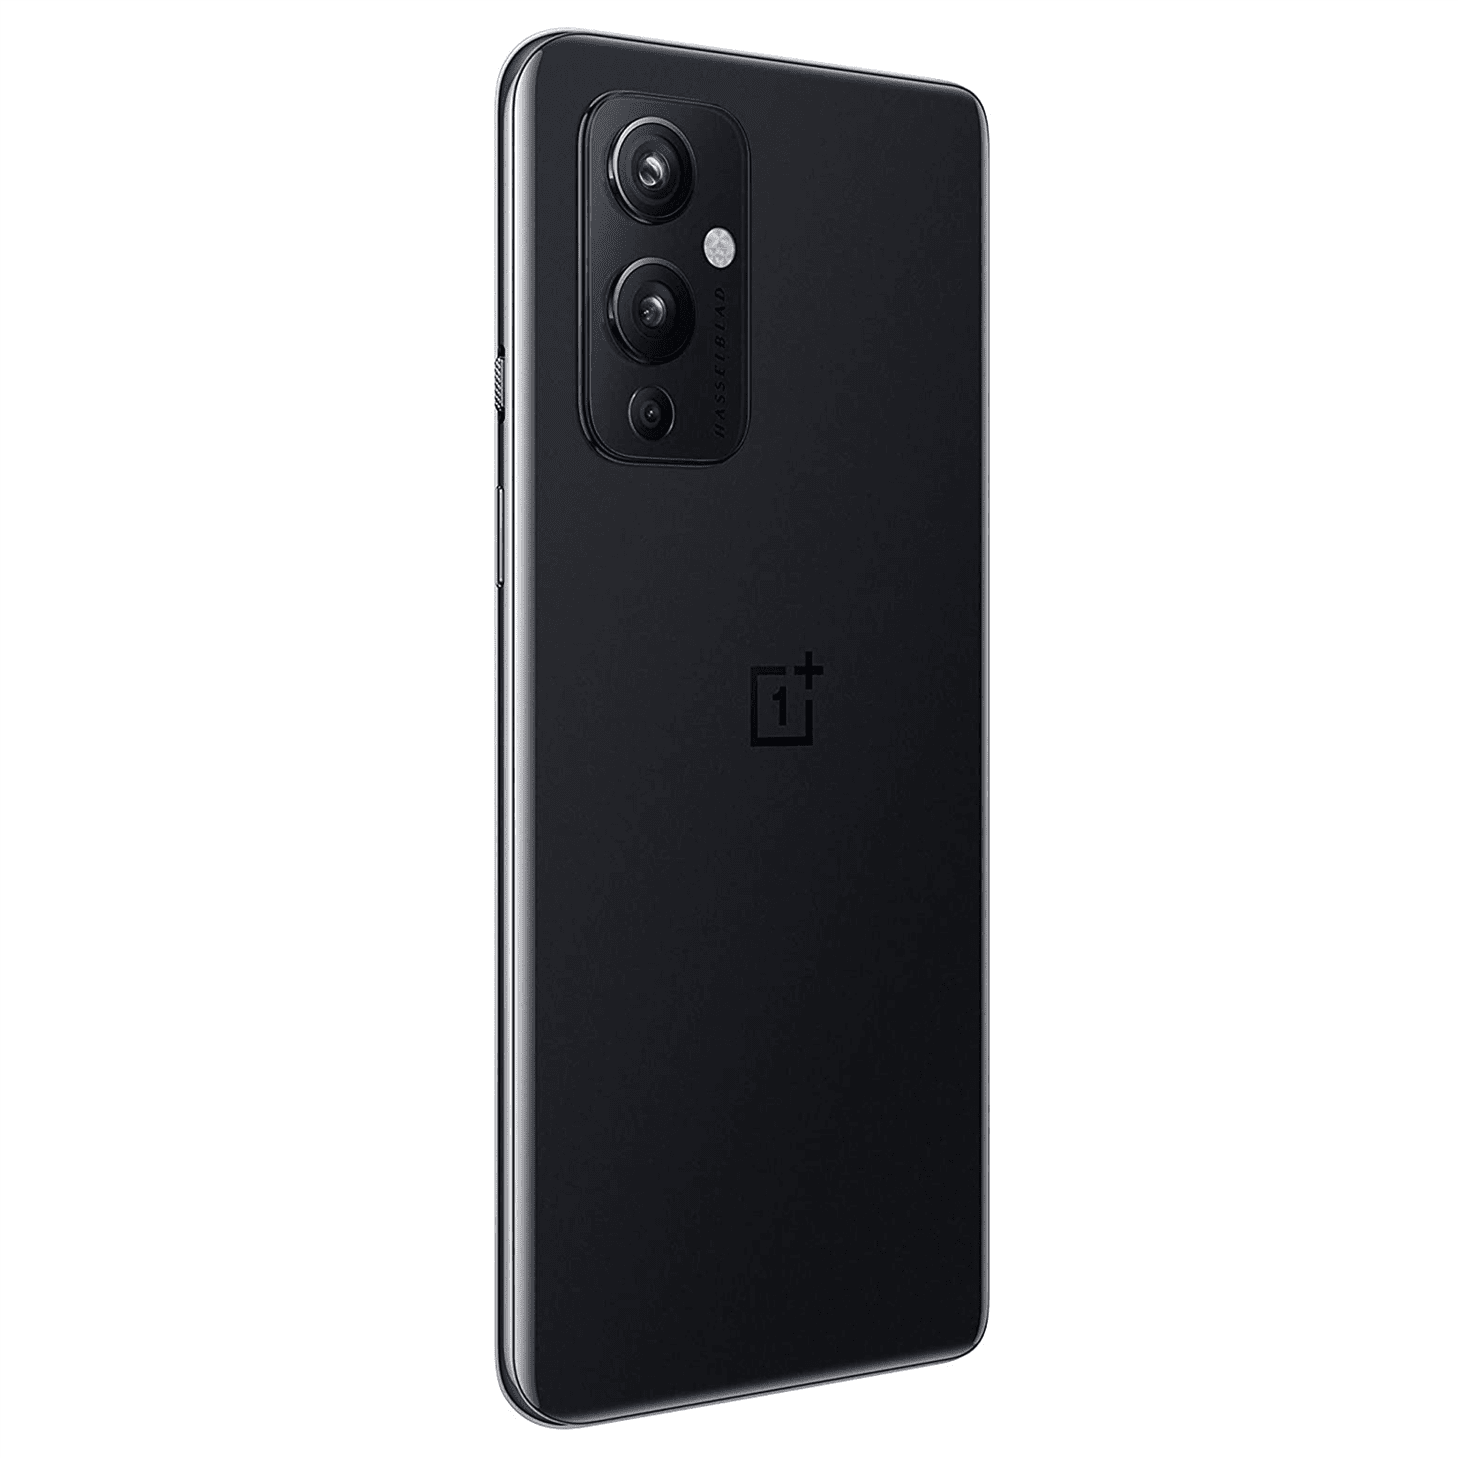  OnePlus 9 5G (128GB, 8GB) 6.55 120Hz Fluid AMOLED, Snapdragon  888, Global 5G Volte (GSM + CDMA) Factory Unlocked (AT&T, Verizon,  T-Mobile, Metro)(Renewed) : Cell Phones & Accessories